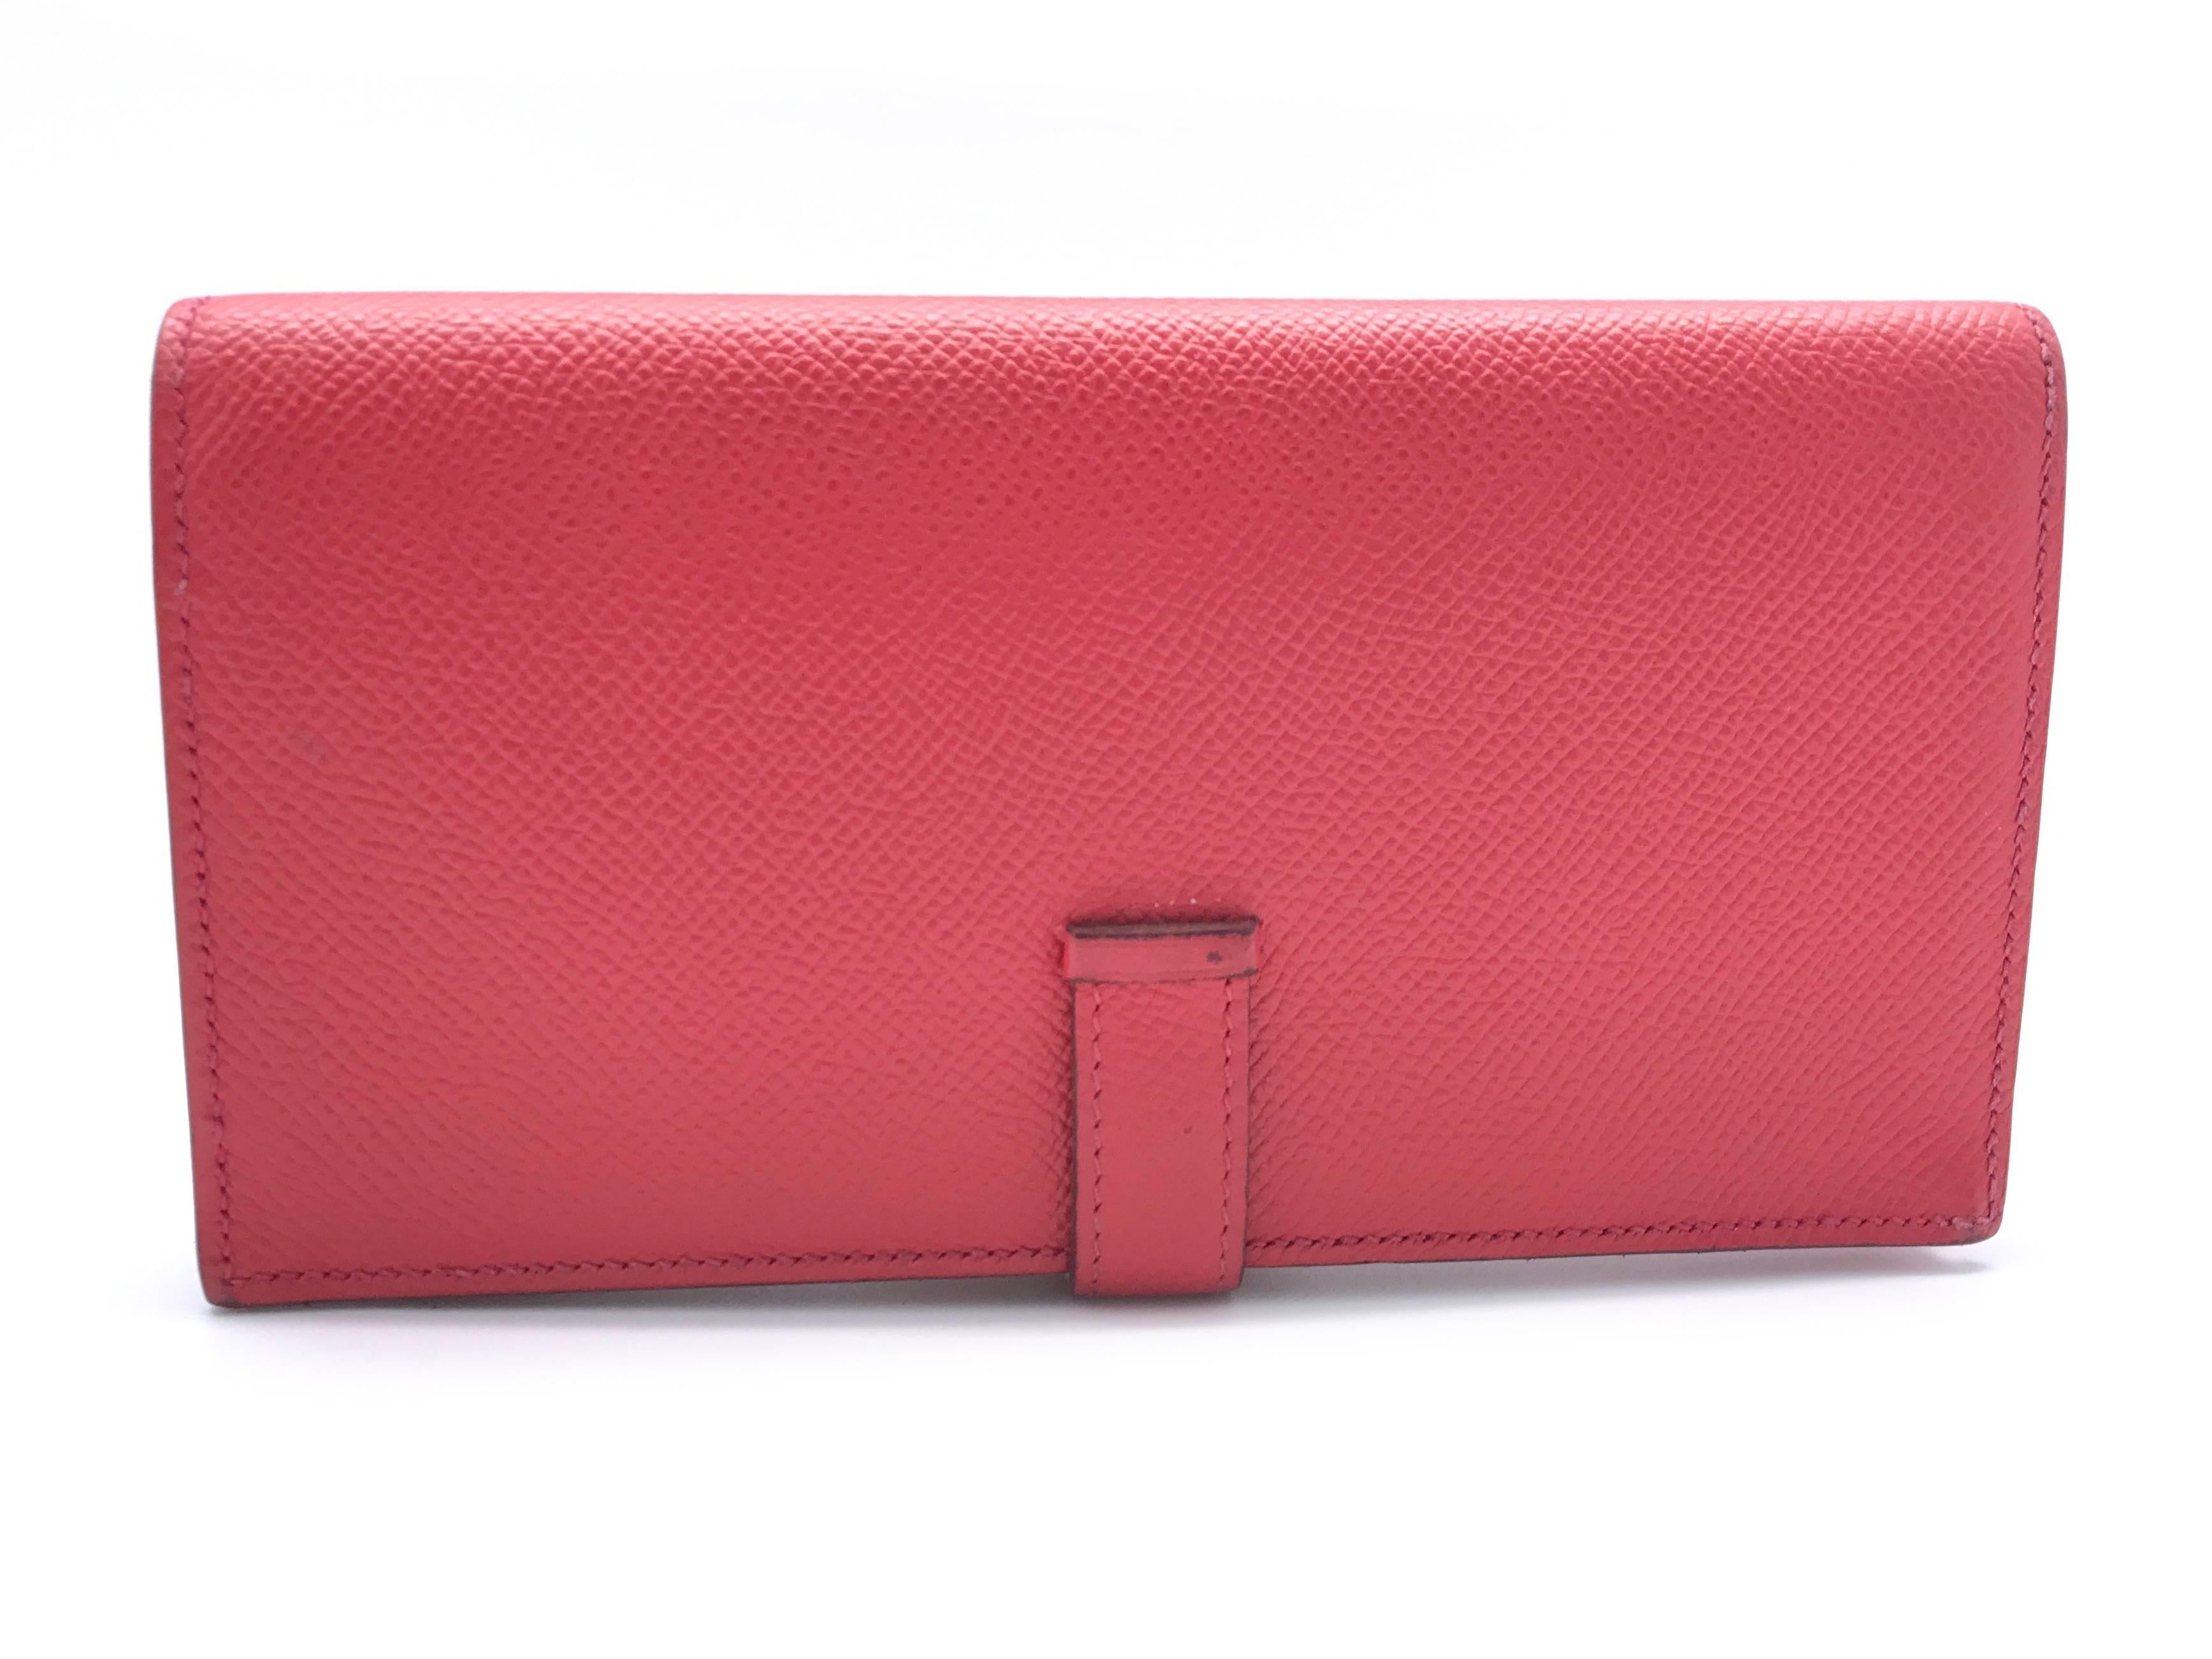 Hermes Red / Rouge Vif Epsom Leather Long Wallet In Excellent Condition For Sale In Kowloon, HK